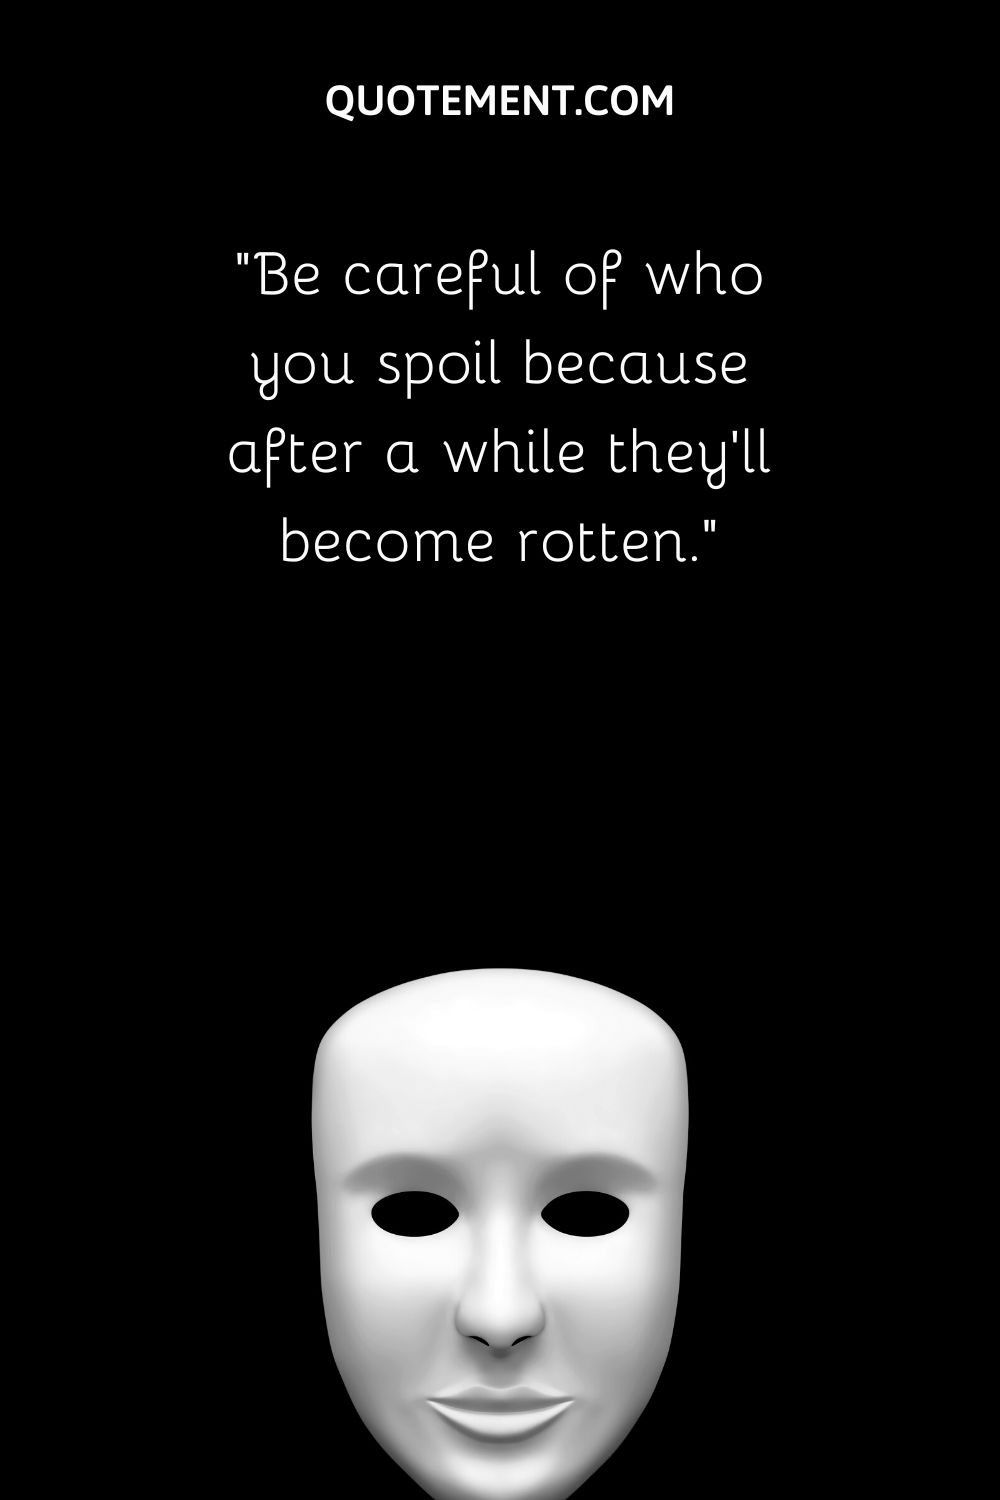 Be careful of who you spoil because after a while they’ll become rotten